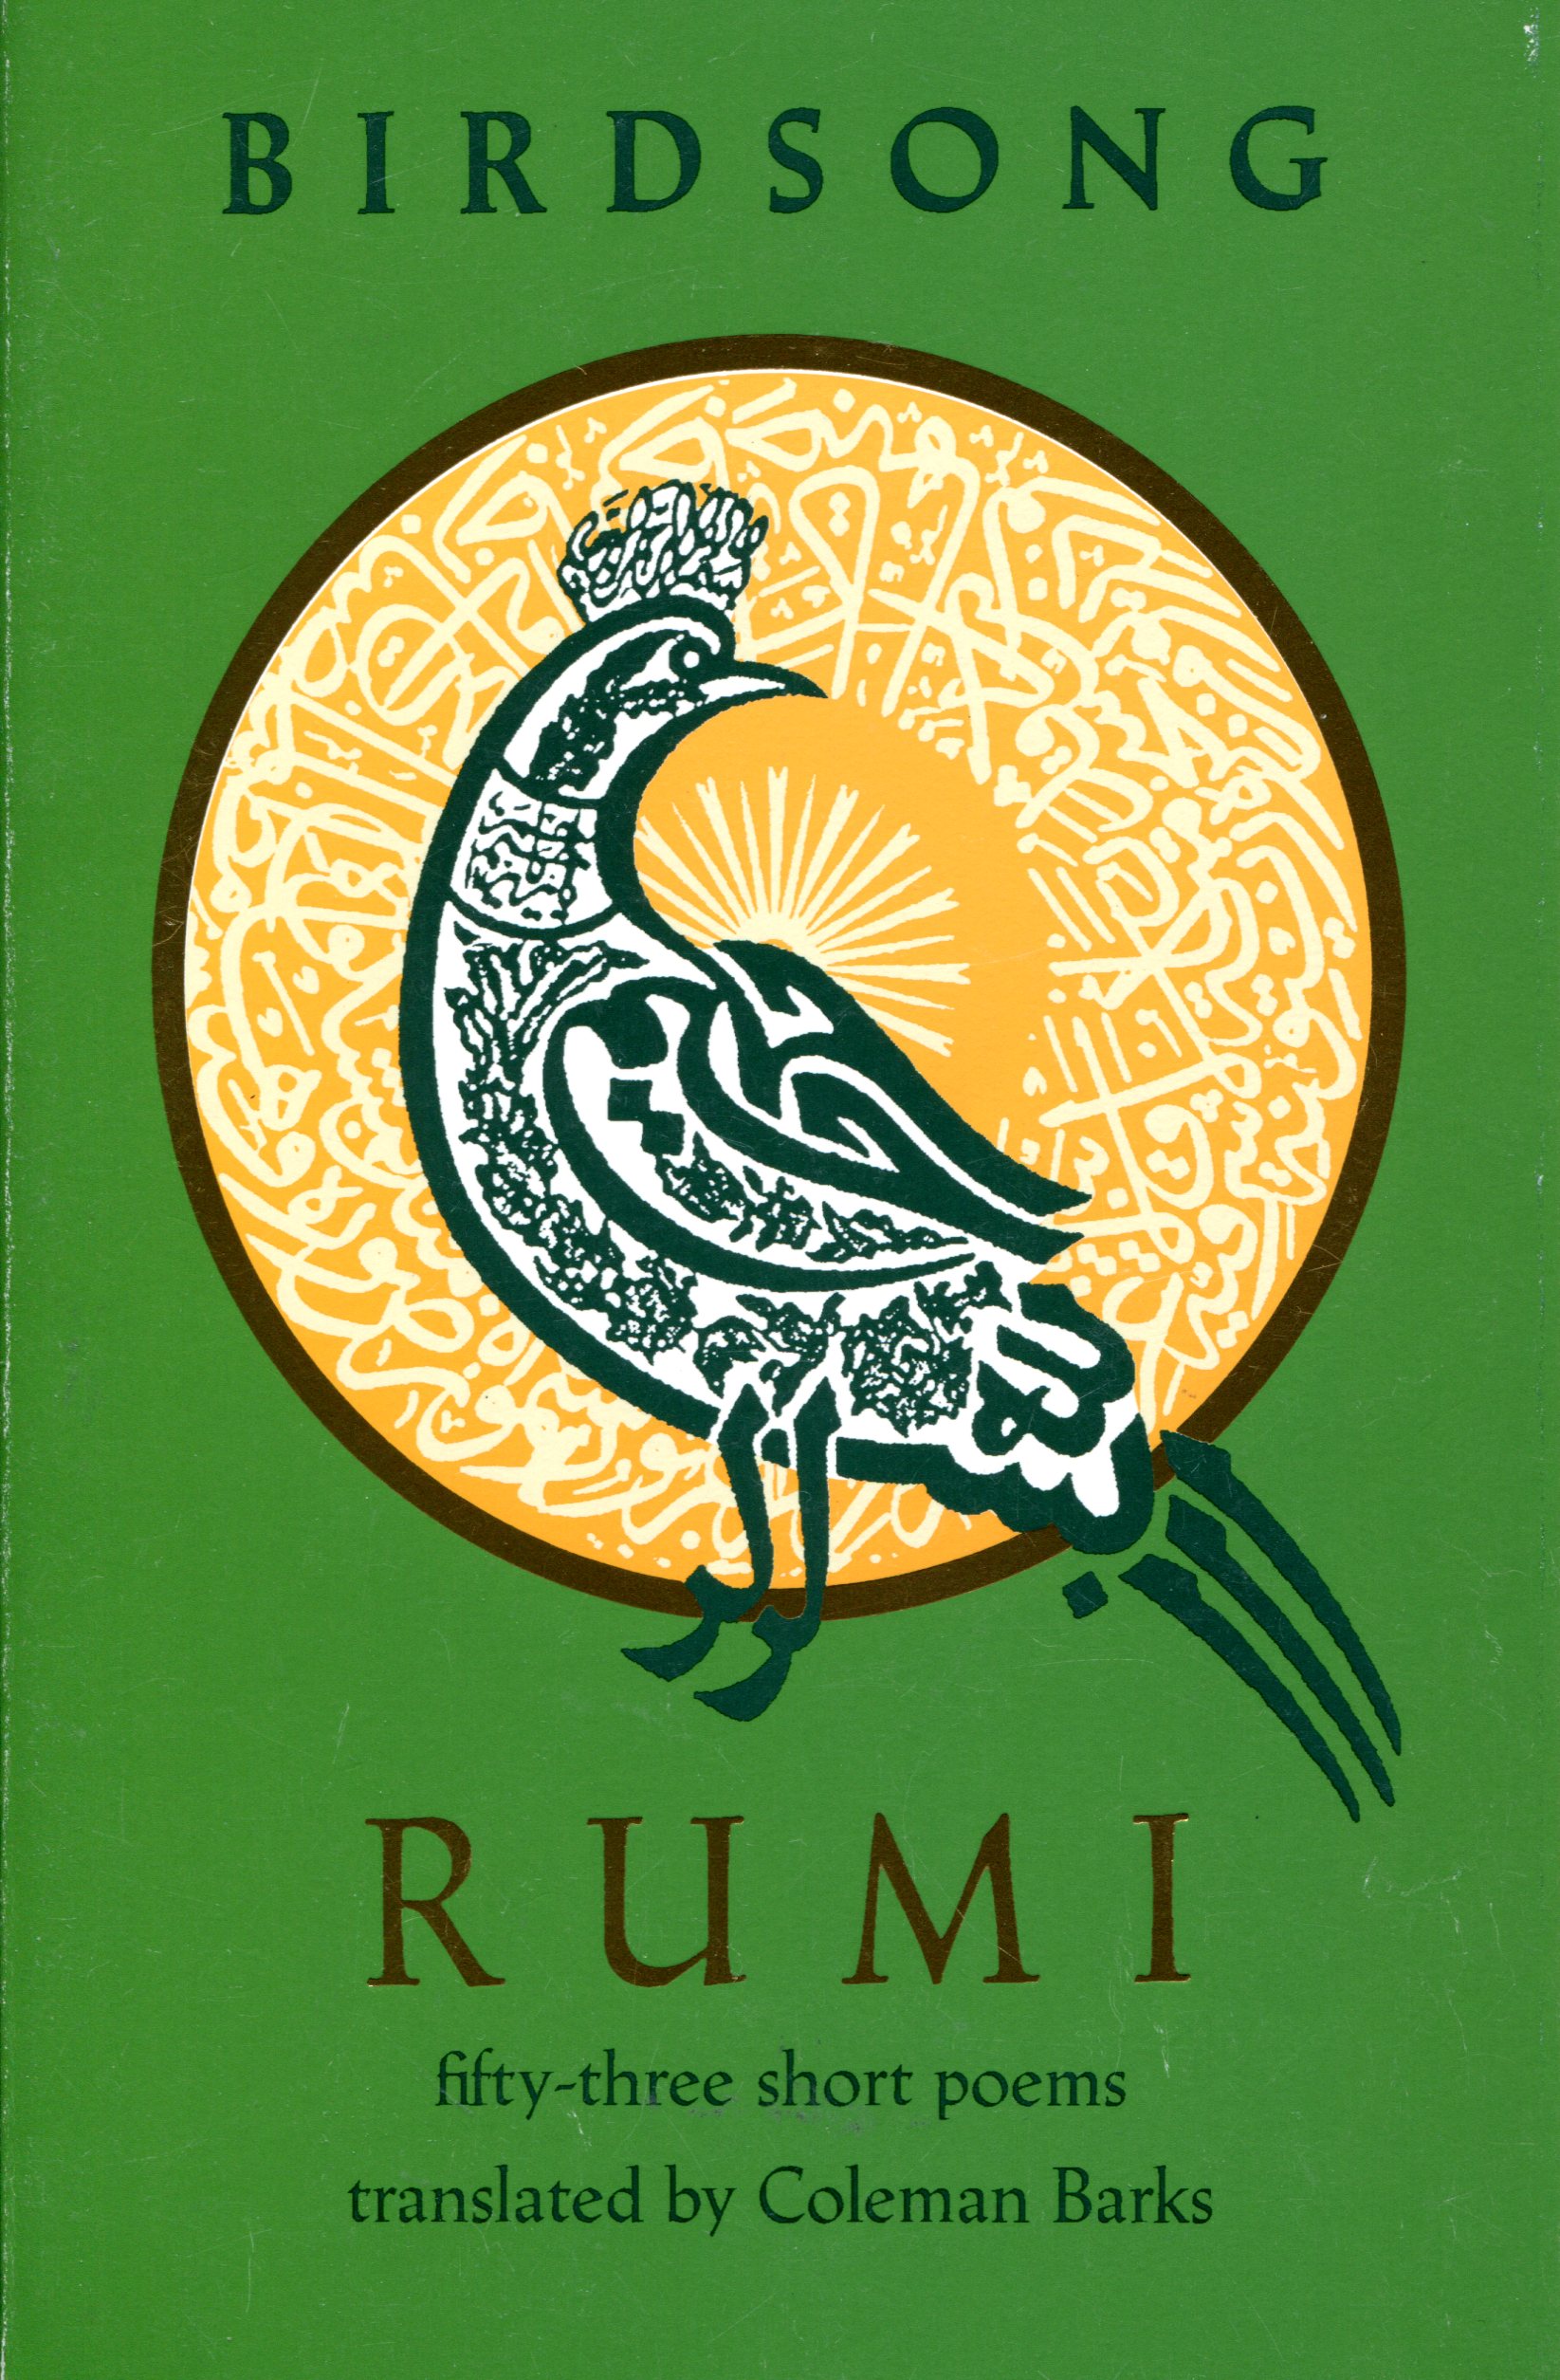 Rumi Birdsong by Coleman Barks